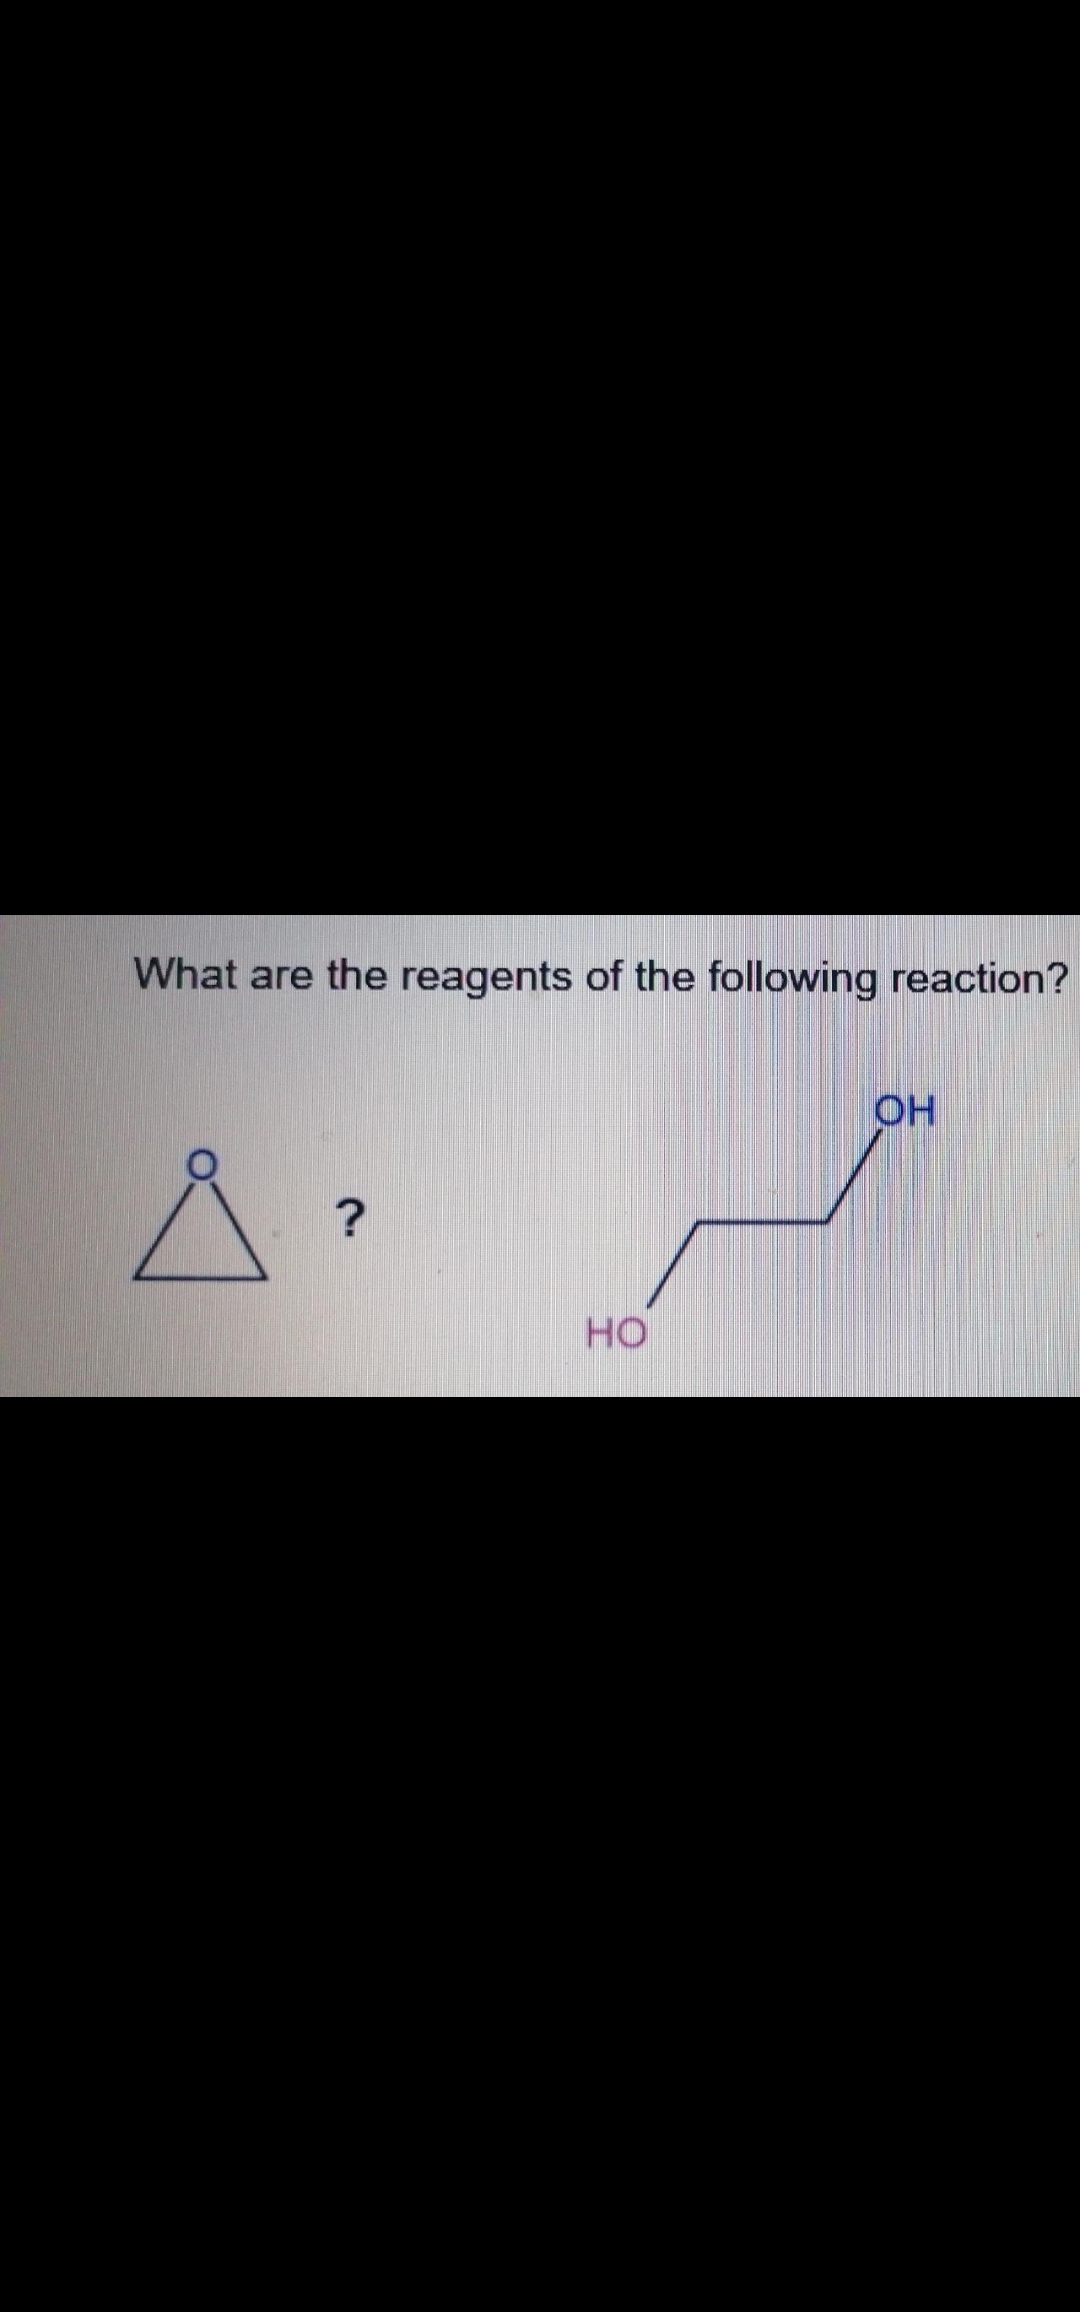 What are the reagents of the following reaction?
OH
но
